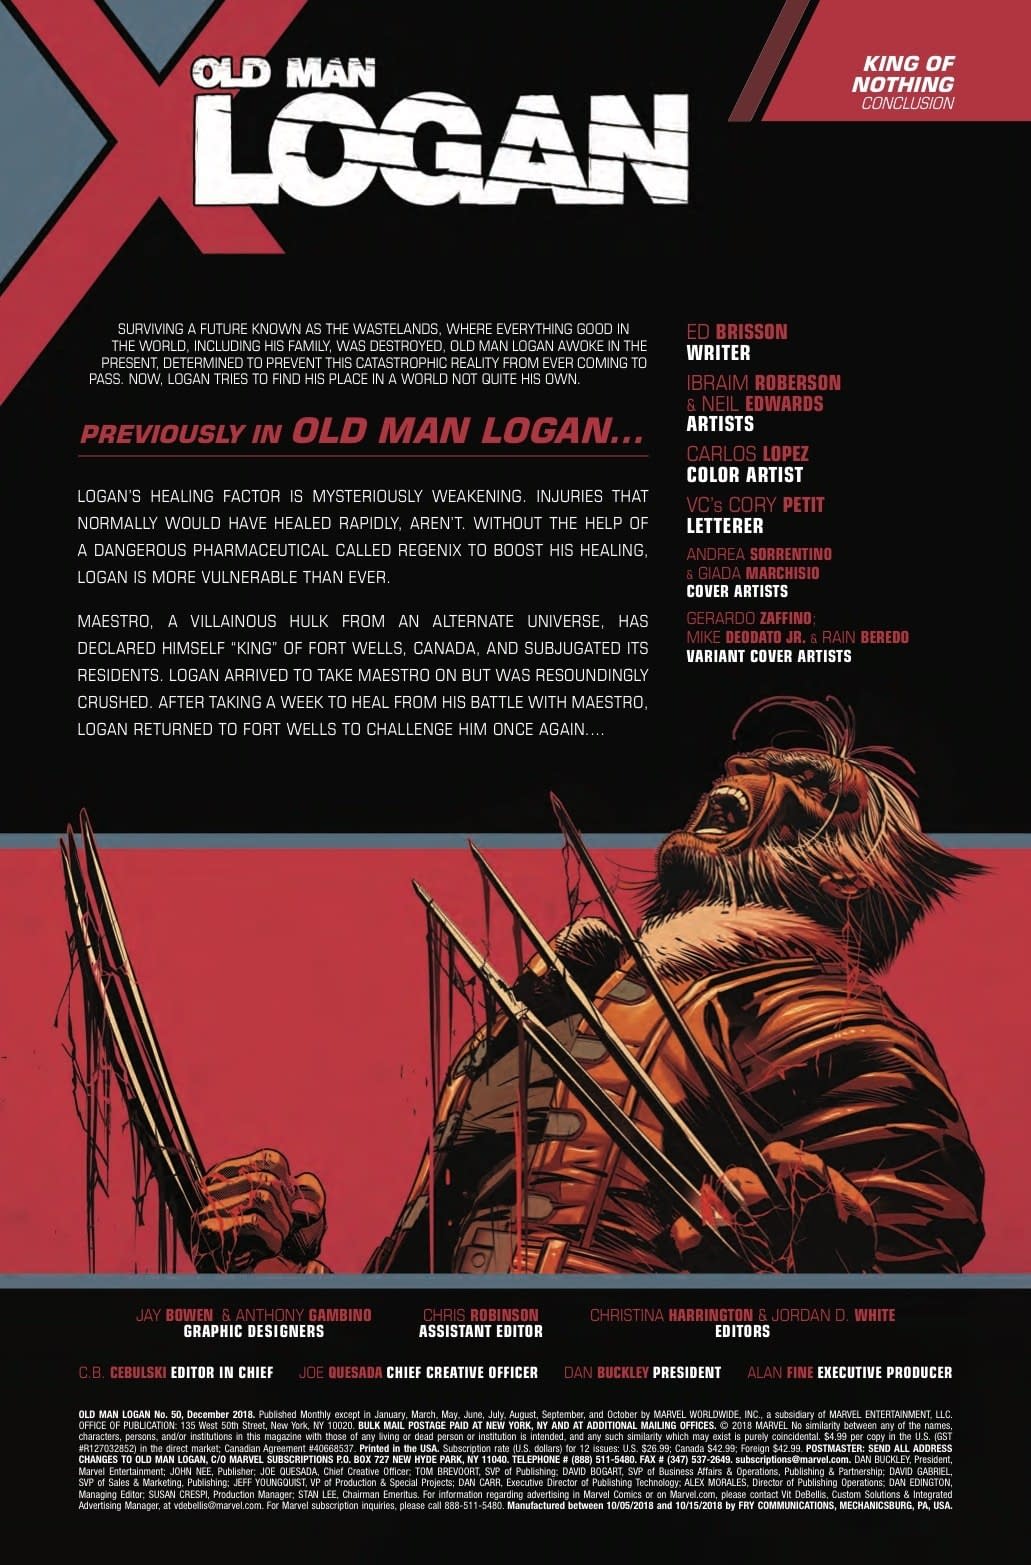 Old Man Logan Finale May Feature the Worst Thing Wolverine's Ever Done